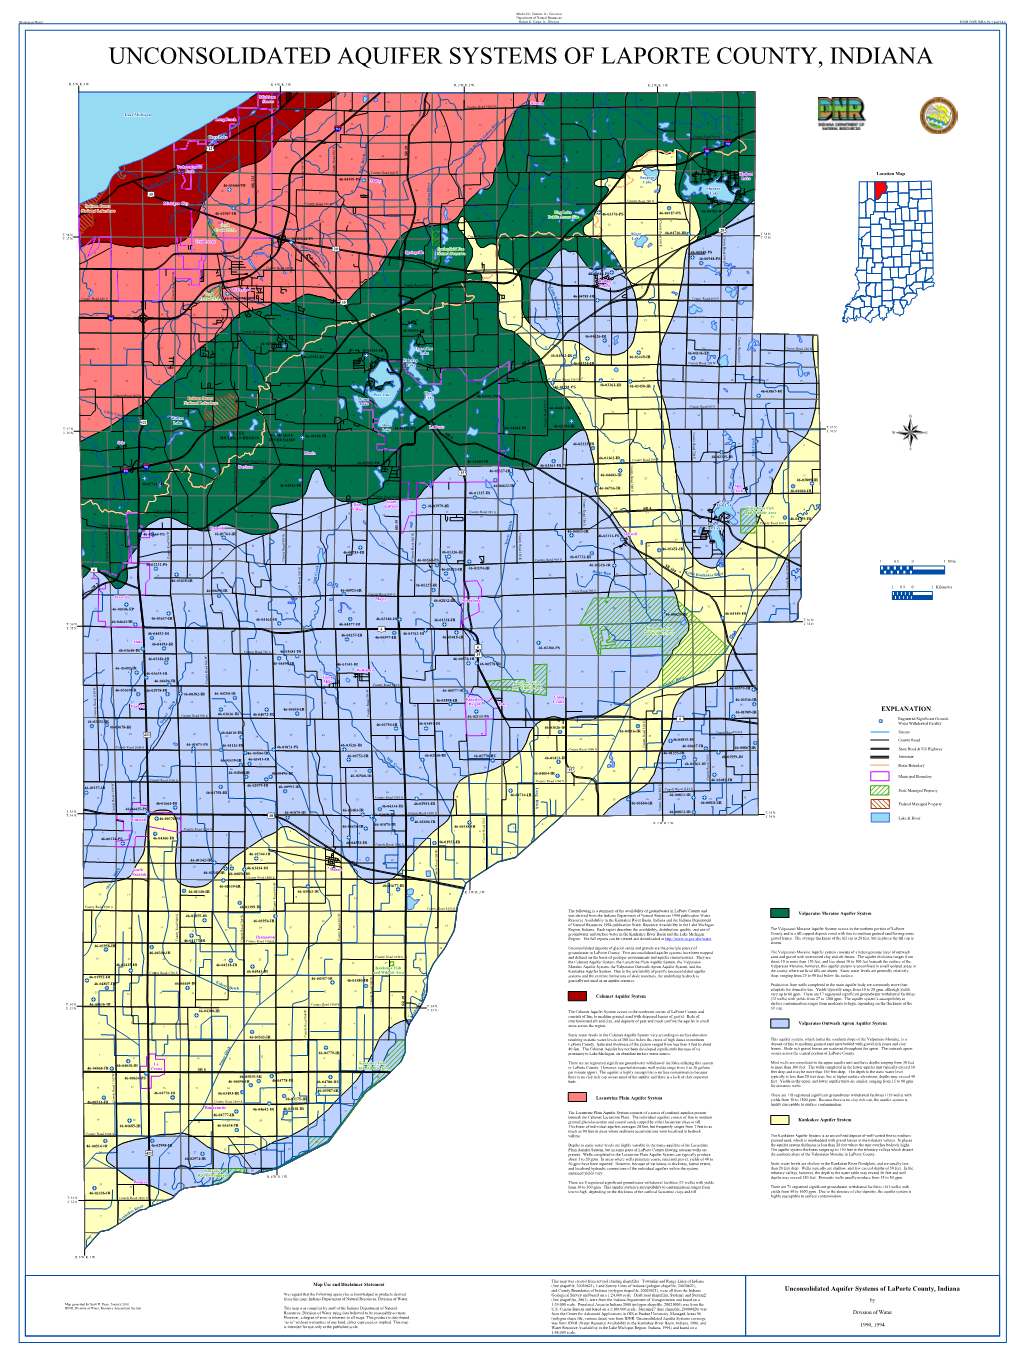 Unconsolidated Aquifer Systems of Laporte County, Indiana